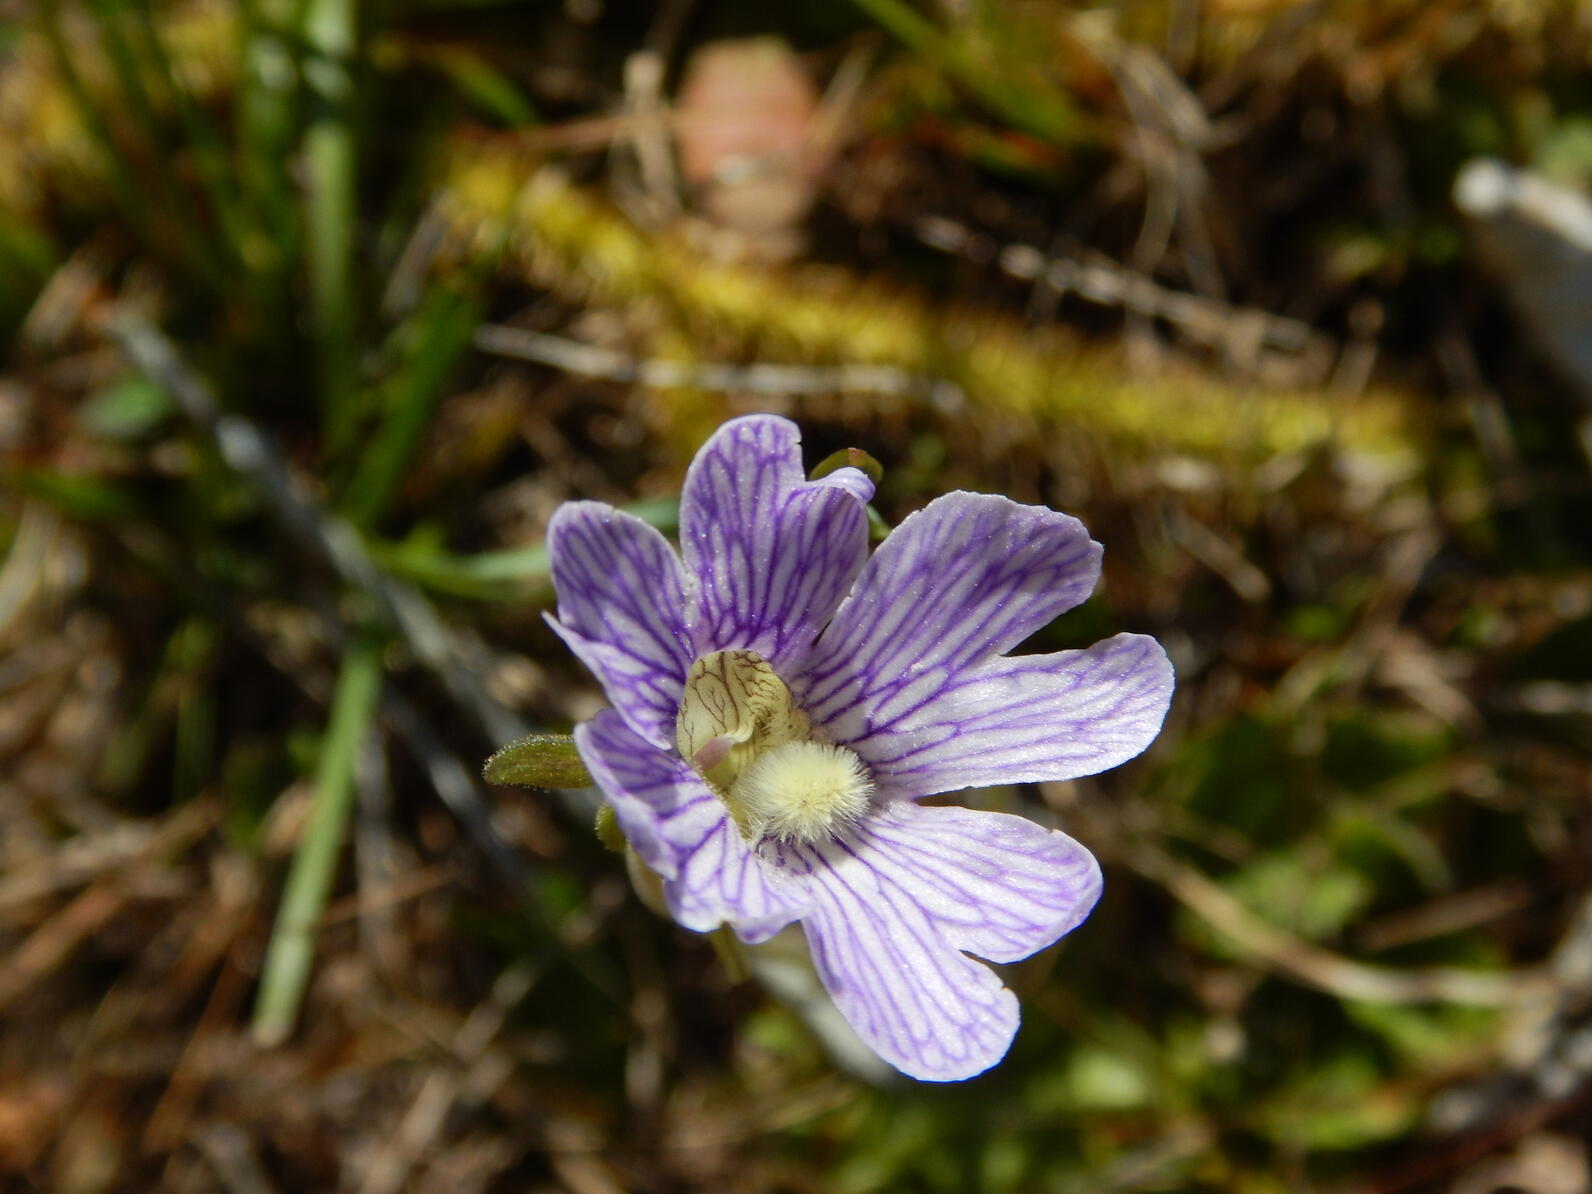 Blue Butterwort is an odd shaped flower with many large flat petals and a fuzzy center.